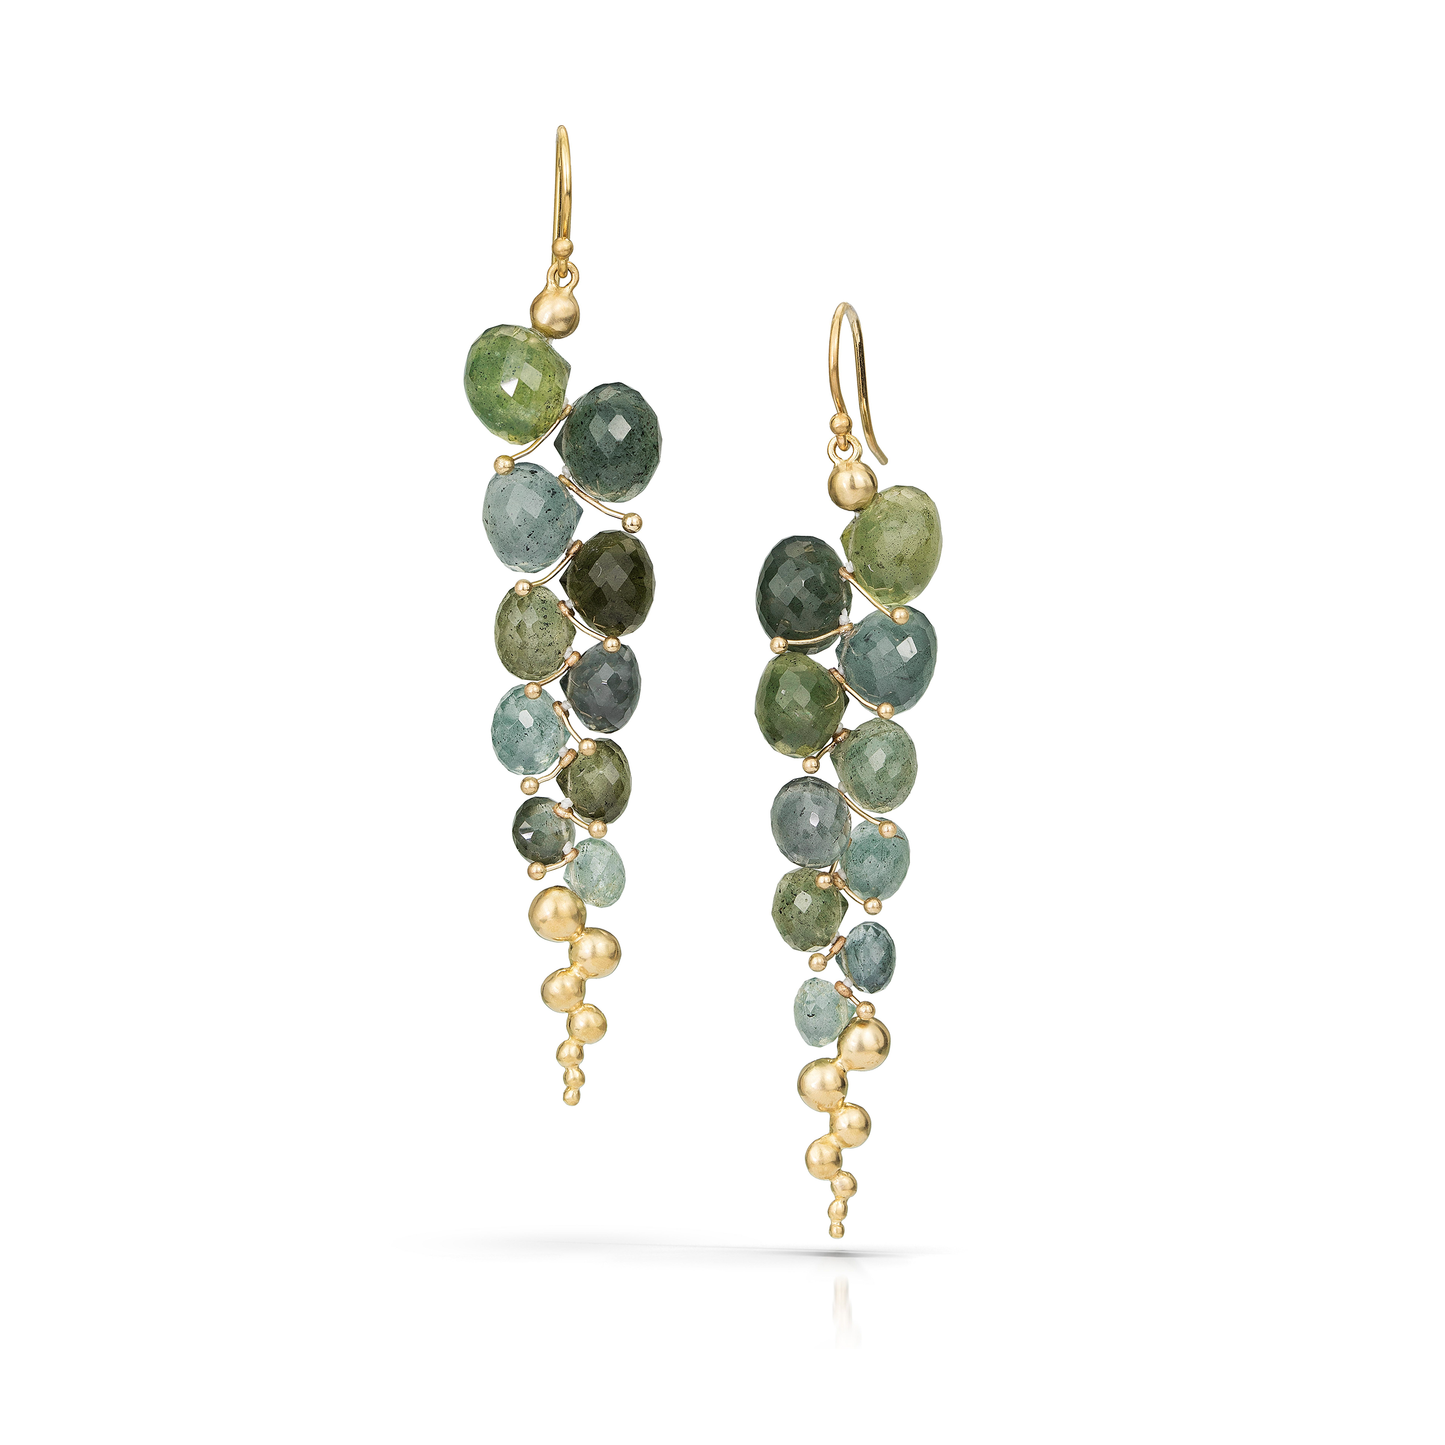 Large Caviar Earrings in 14k Yellow Gold and Moss Aquamarines